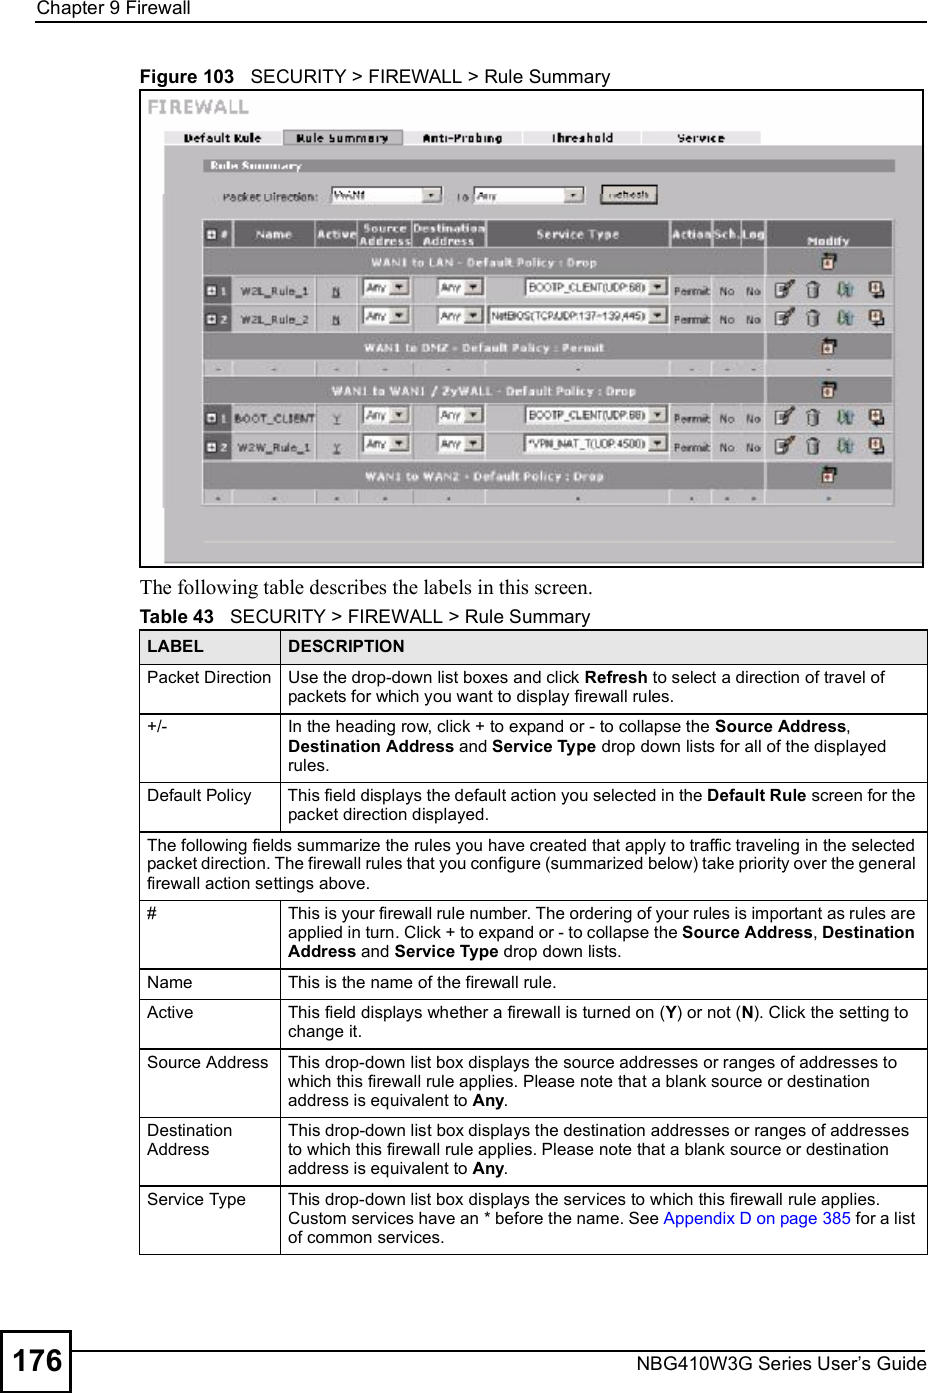 Chapter 9FirewallNBG410W3G Series User s Guide176Figure 103   SECURITY &gt; FIREWALL &gt; Rule SummaryThe following table describes the labels in this screen.   Table 43   SECURITY &gt; FIREWALL &gt; Rule SummaryLABEL DESCRIPTIONPacket DirectionUse the drop-down list boxes and click Refresh to select a direction of travel of packets for which you want to display firewall rules.+/-In the heading row, click + to expand or - to collapse the Source Address, Destination Address and Service Type drop down lists for all of the displayed rules.Default PolicyThis field displays the default action you selected in the Default Rule screen for the packet direction displayed.The following fields summarize the rules you have created that apply to traffic traveling in the selected packet direction. The firewall rules that you configure (summarized below) take priority over the general firewall action settings above.#This is your firewall rule number. The ordering of your rules is important as rules are applied in turn. Click + to expand or - to collapse the Source Address, Destination Address and Service Type drop down lists.NameThis is the name of the firewall rule.ActiveThis field displays whether a firewall is turned on (Y) or not (N). Click the setting to change it.Source AddressThis drop-down list box displays the source addresses or ranges of addresses to which this firewall rule applies. Please note that a blank source or destination address is equivalent to Any.Destination AddressThis drop-down list box displays the destination addresses or ranges of addresses to which this firewall rule applies. Please note that a blank source or destination address is equivalent to Any.Service TypeThis drop-down list box displays the services to which this firewall rule applies. Custom services have an * before the name. See Appendix D on page 385 for a list of common services.